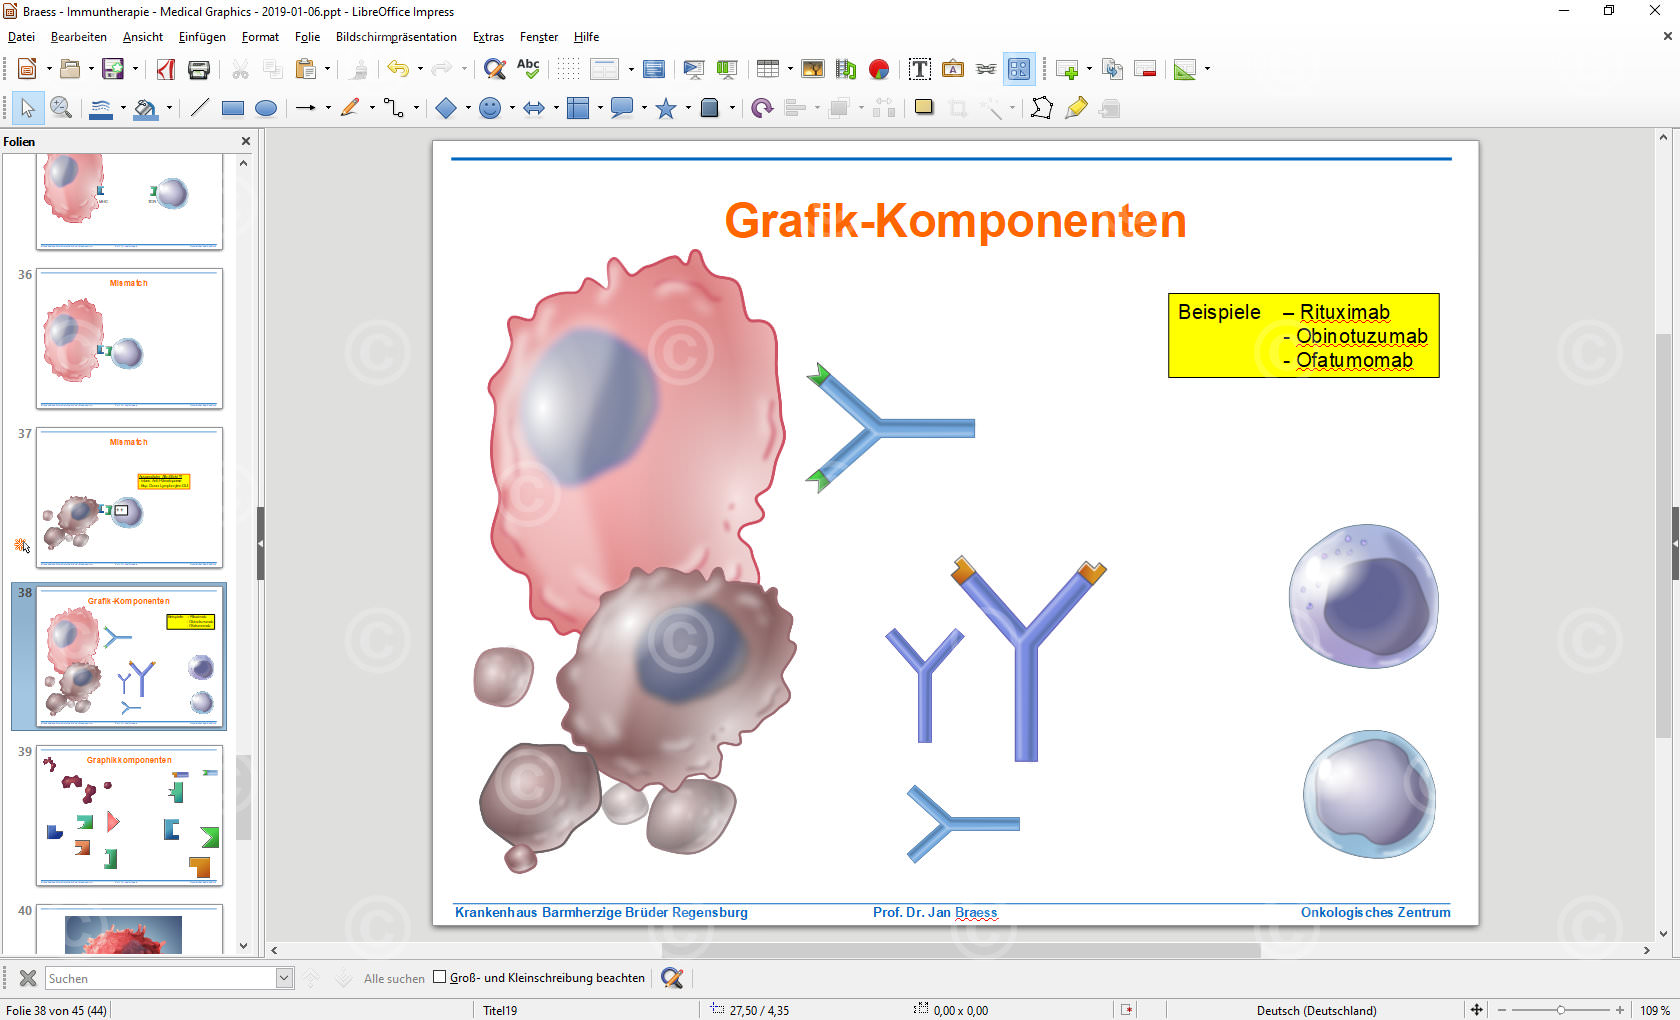 Modular graphic elements for PowerPoint about cancer immunotherapy